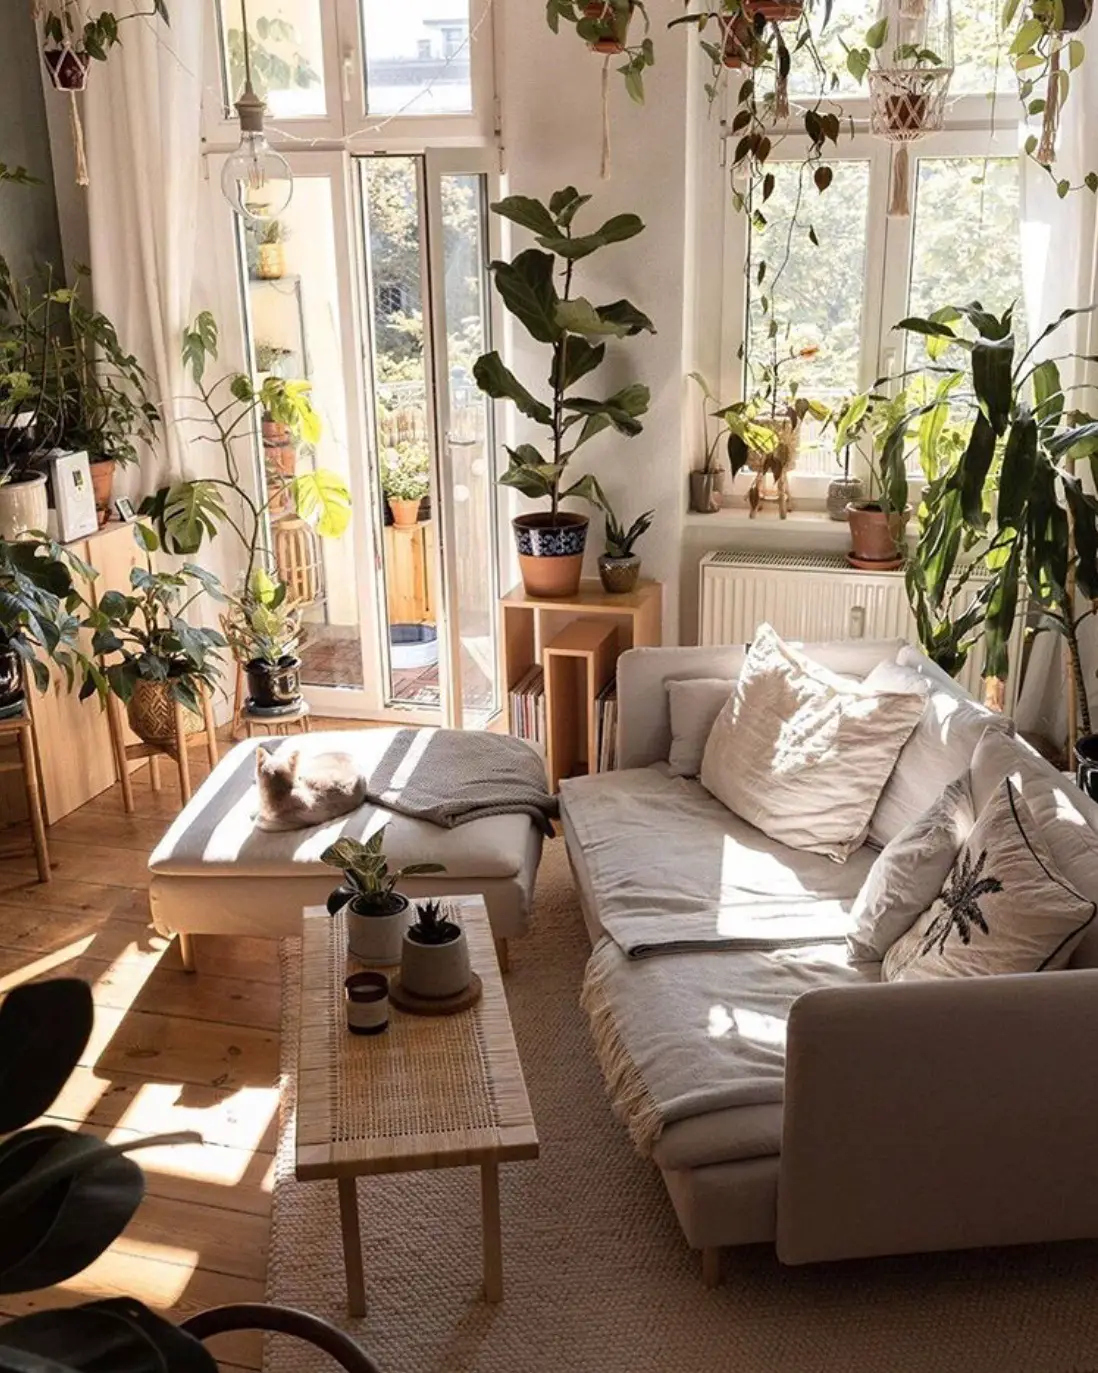 15 Elegant Ways To Decorate Your Living Room With Plants - The Wonder